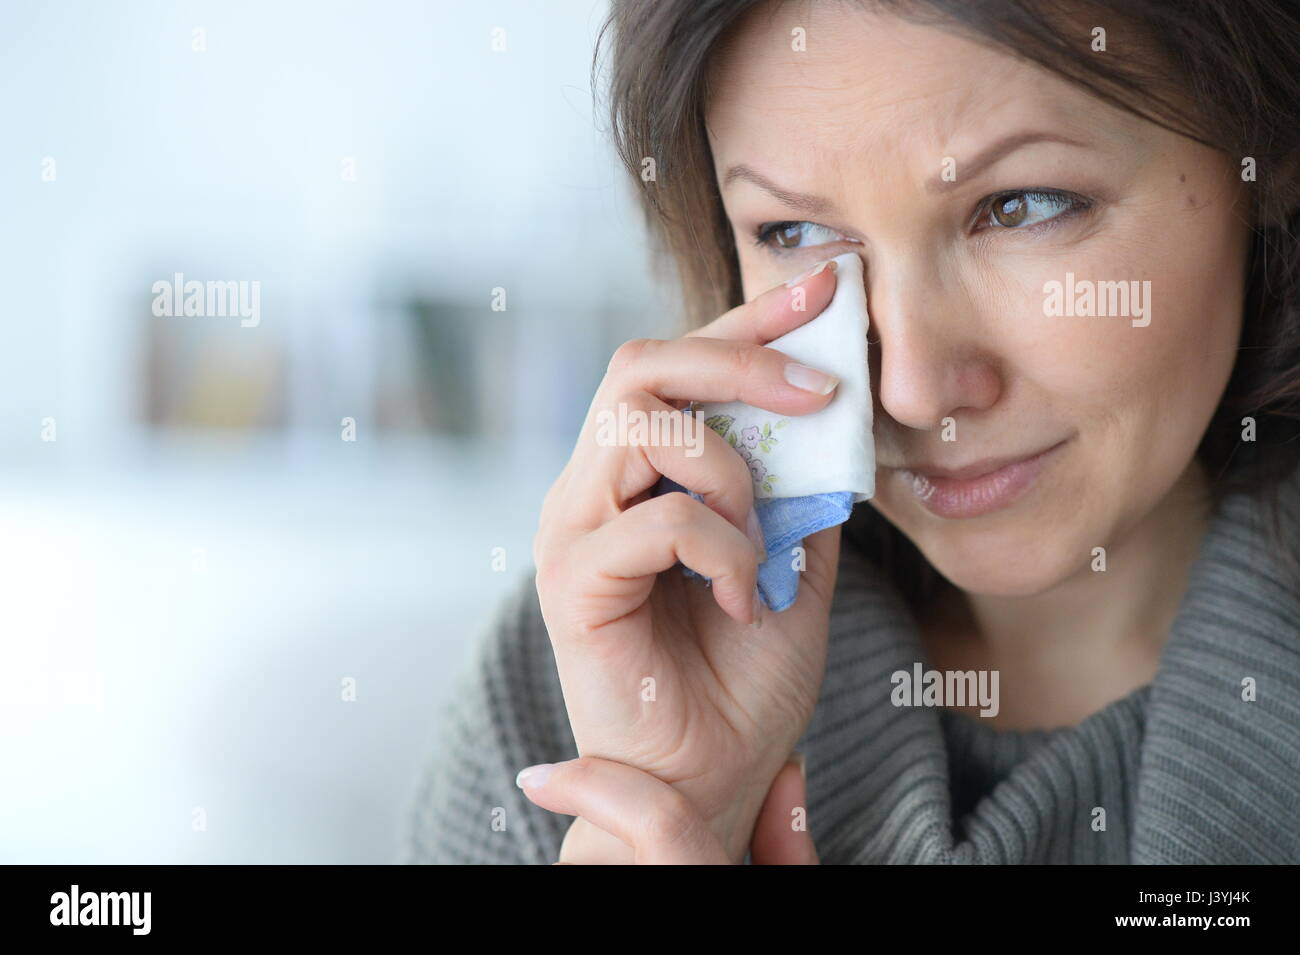 Crying young woman close-up Stock Photo